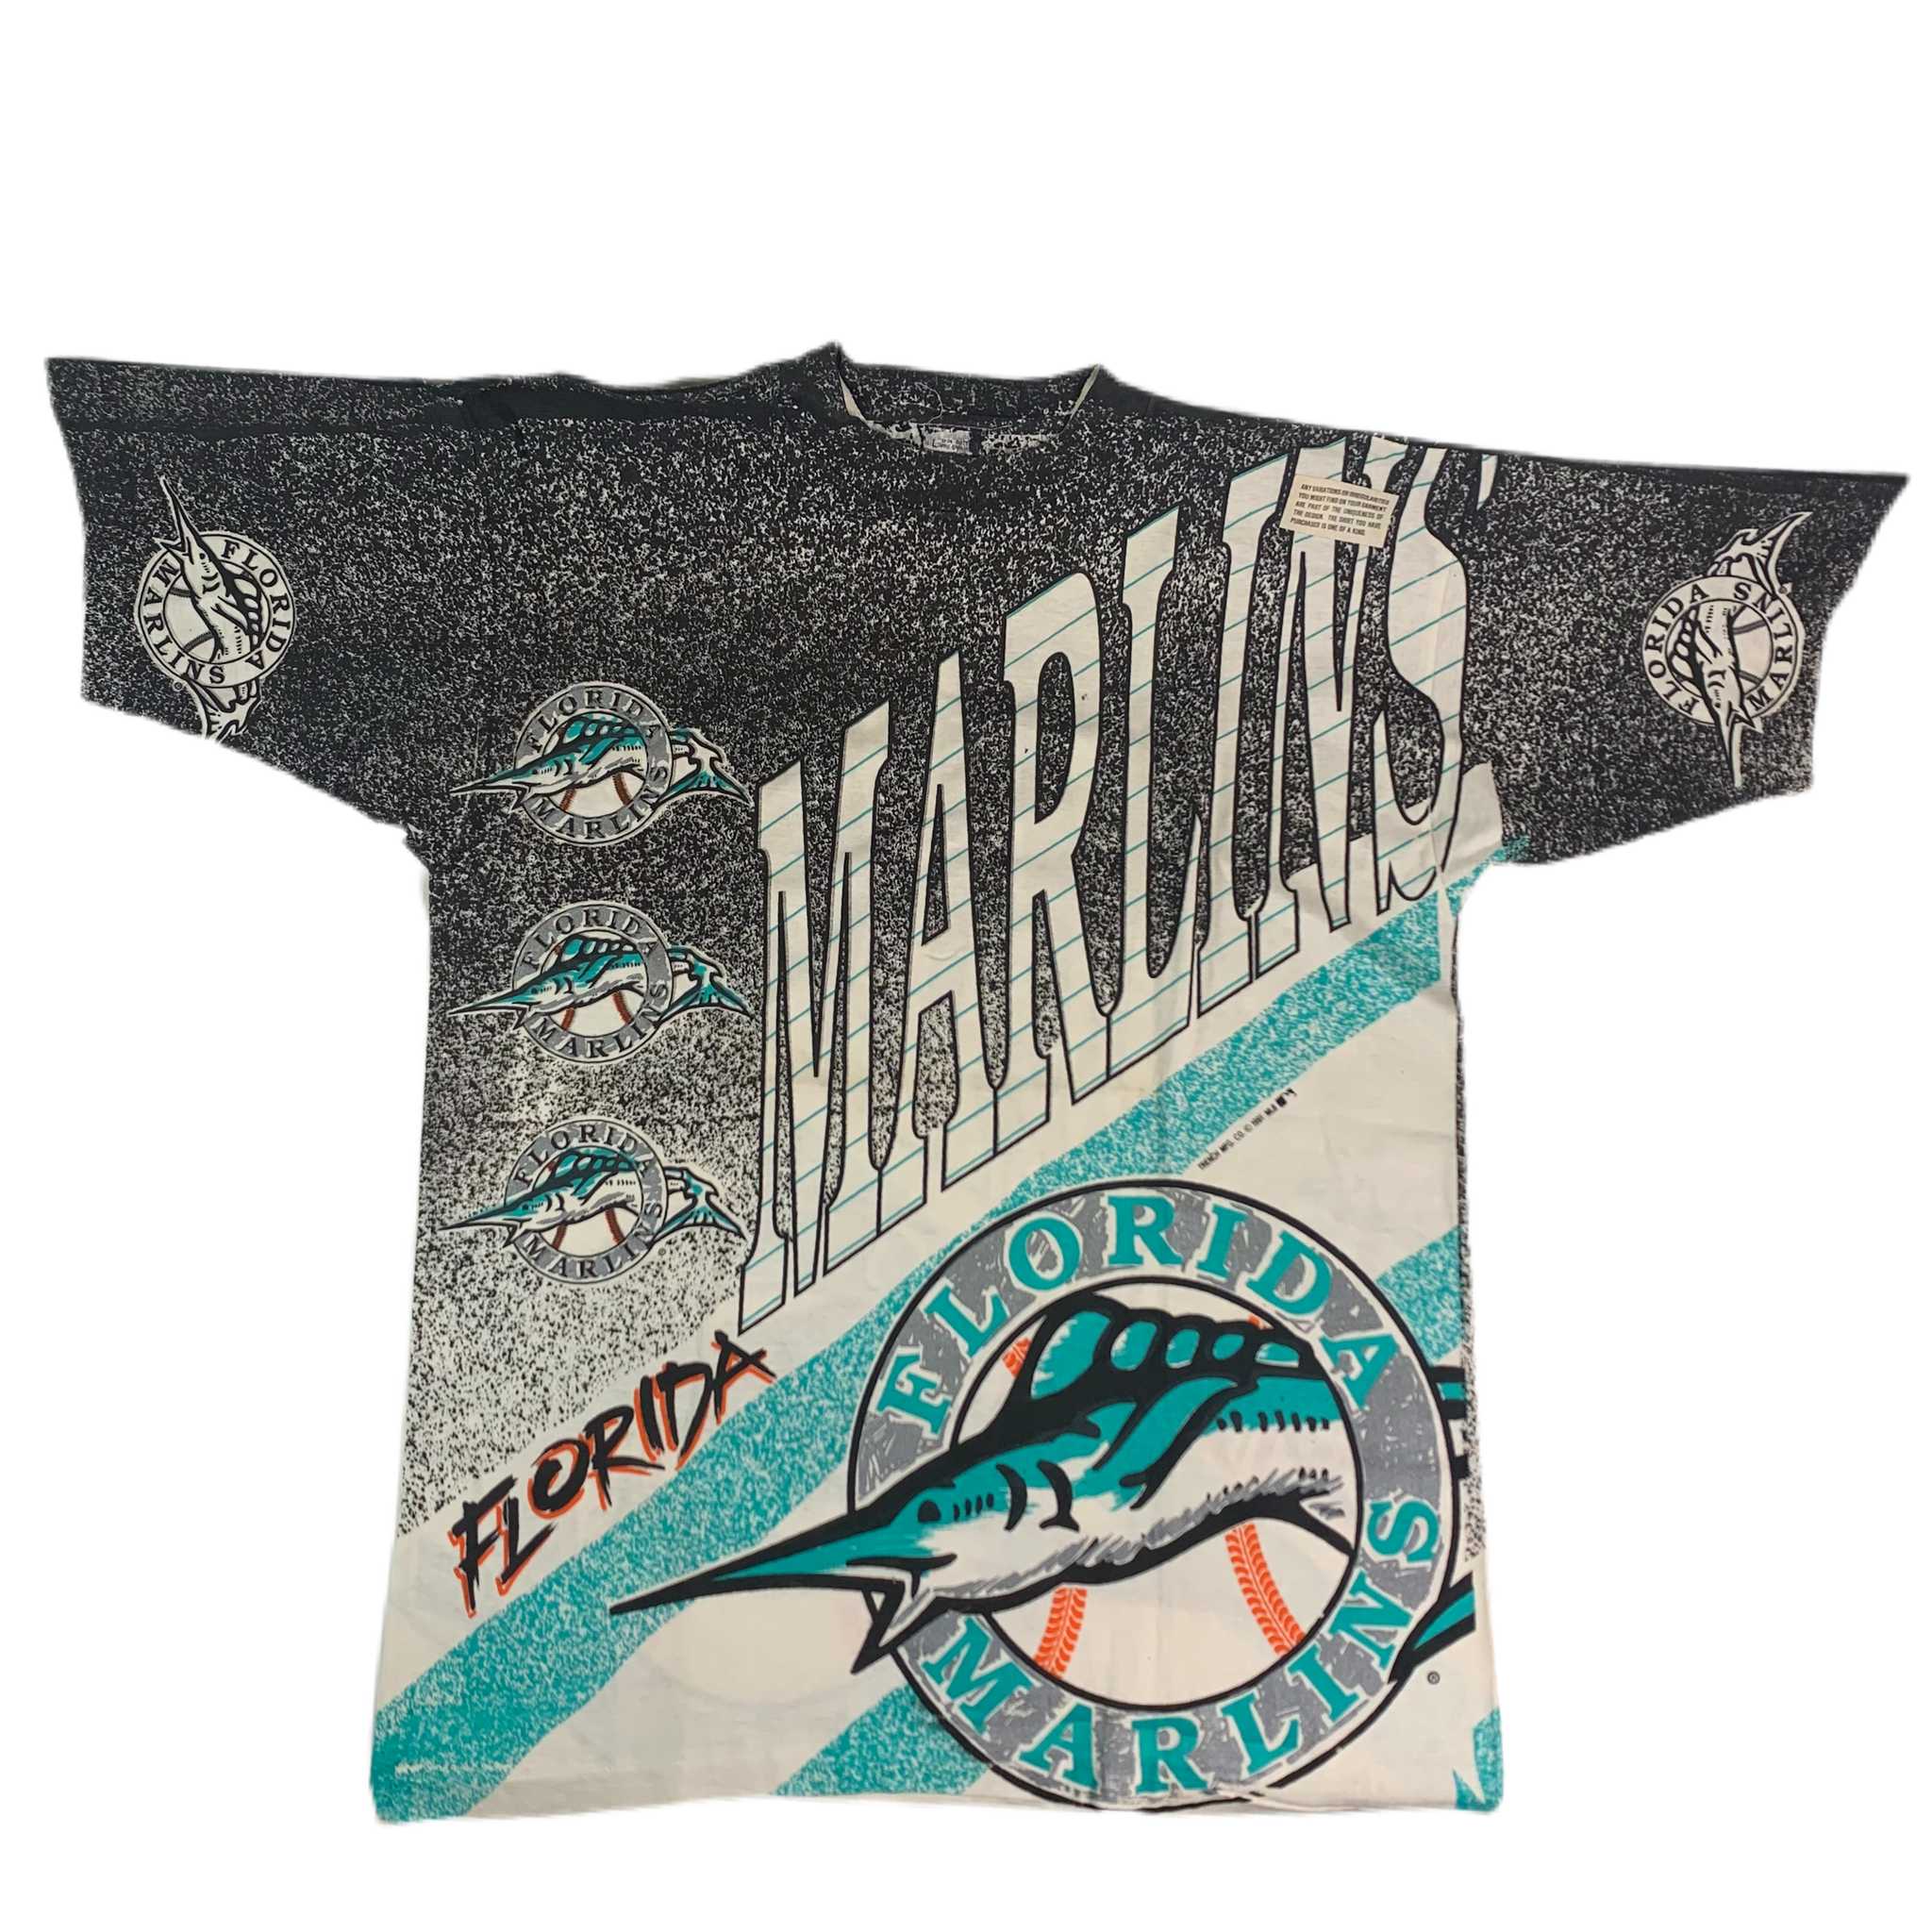 Vintage 1993 Florida Marlins MLB single stitch T-shirt. Made in the USA.  Tagged as a large